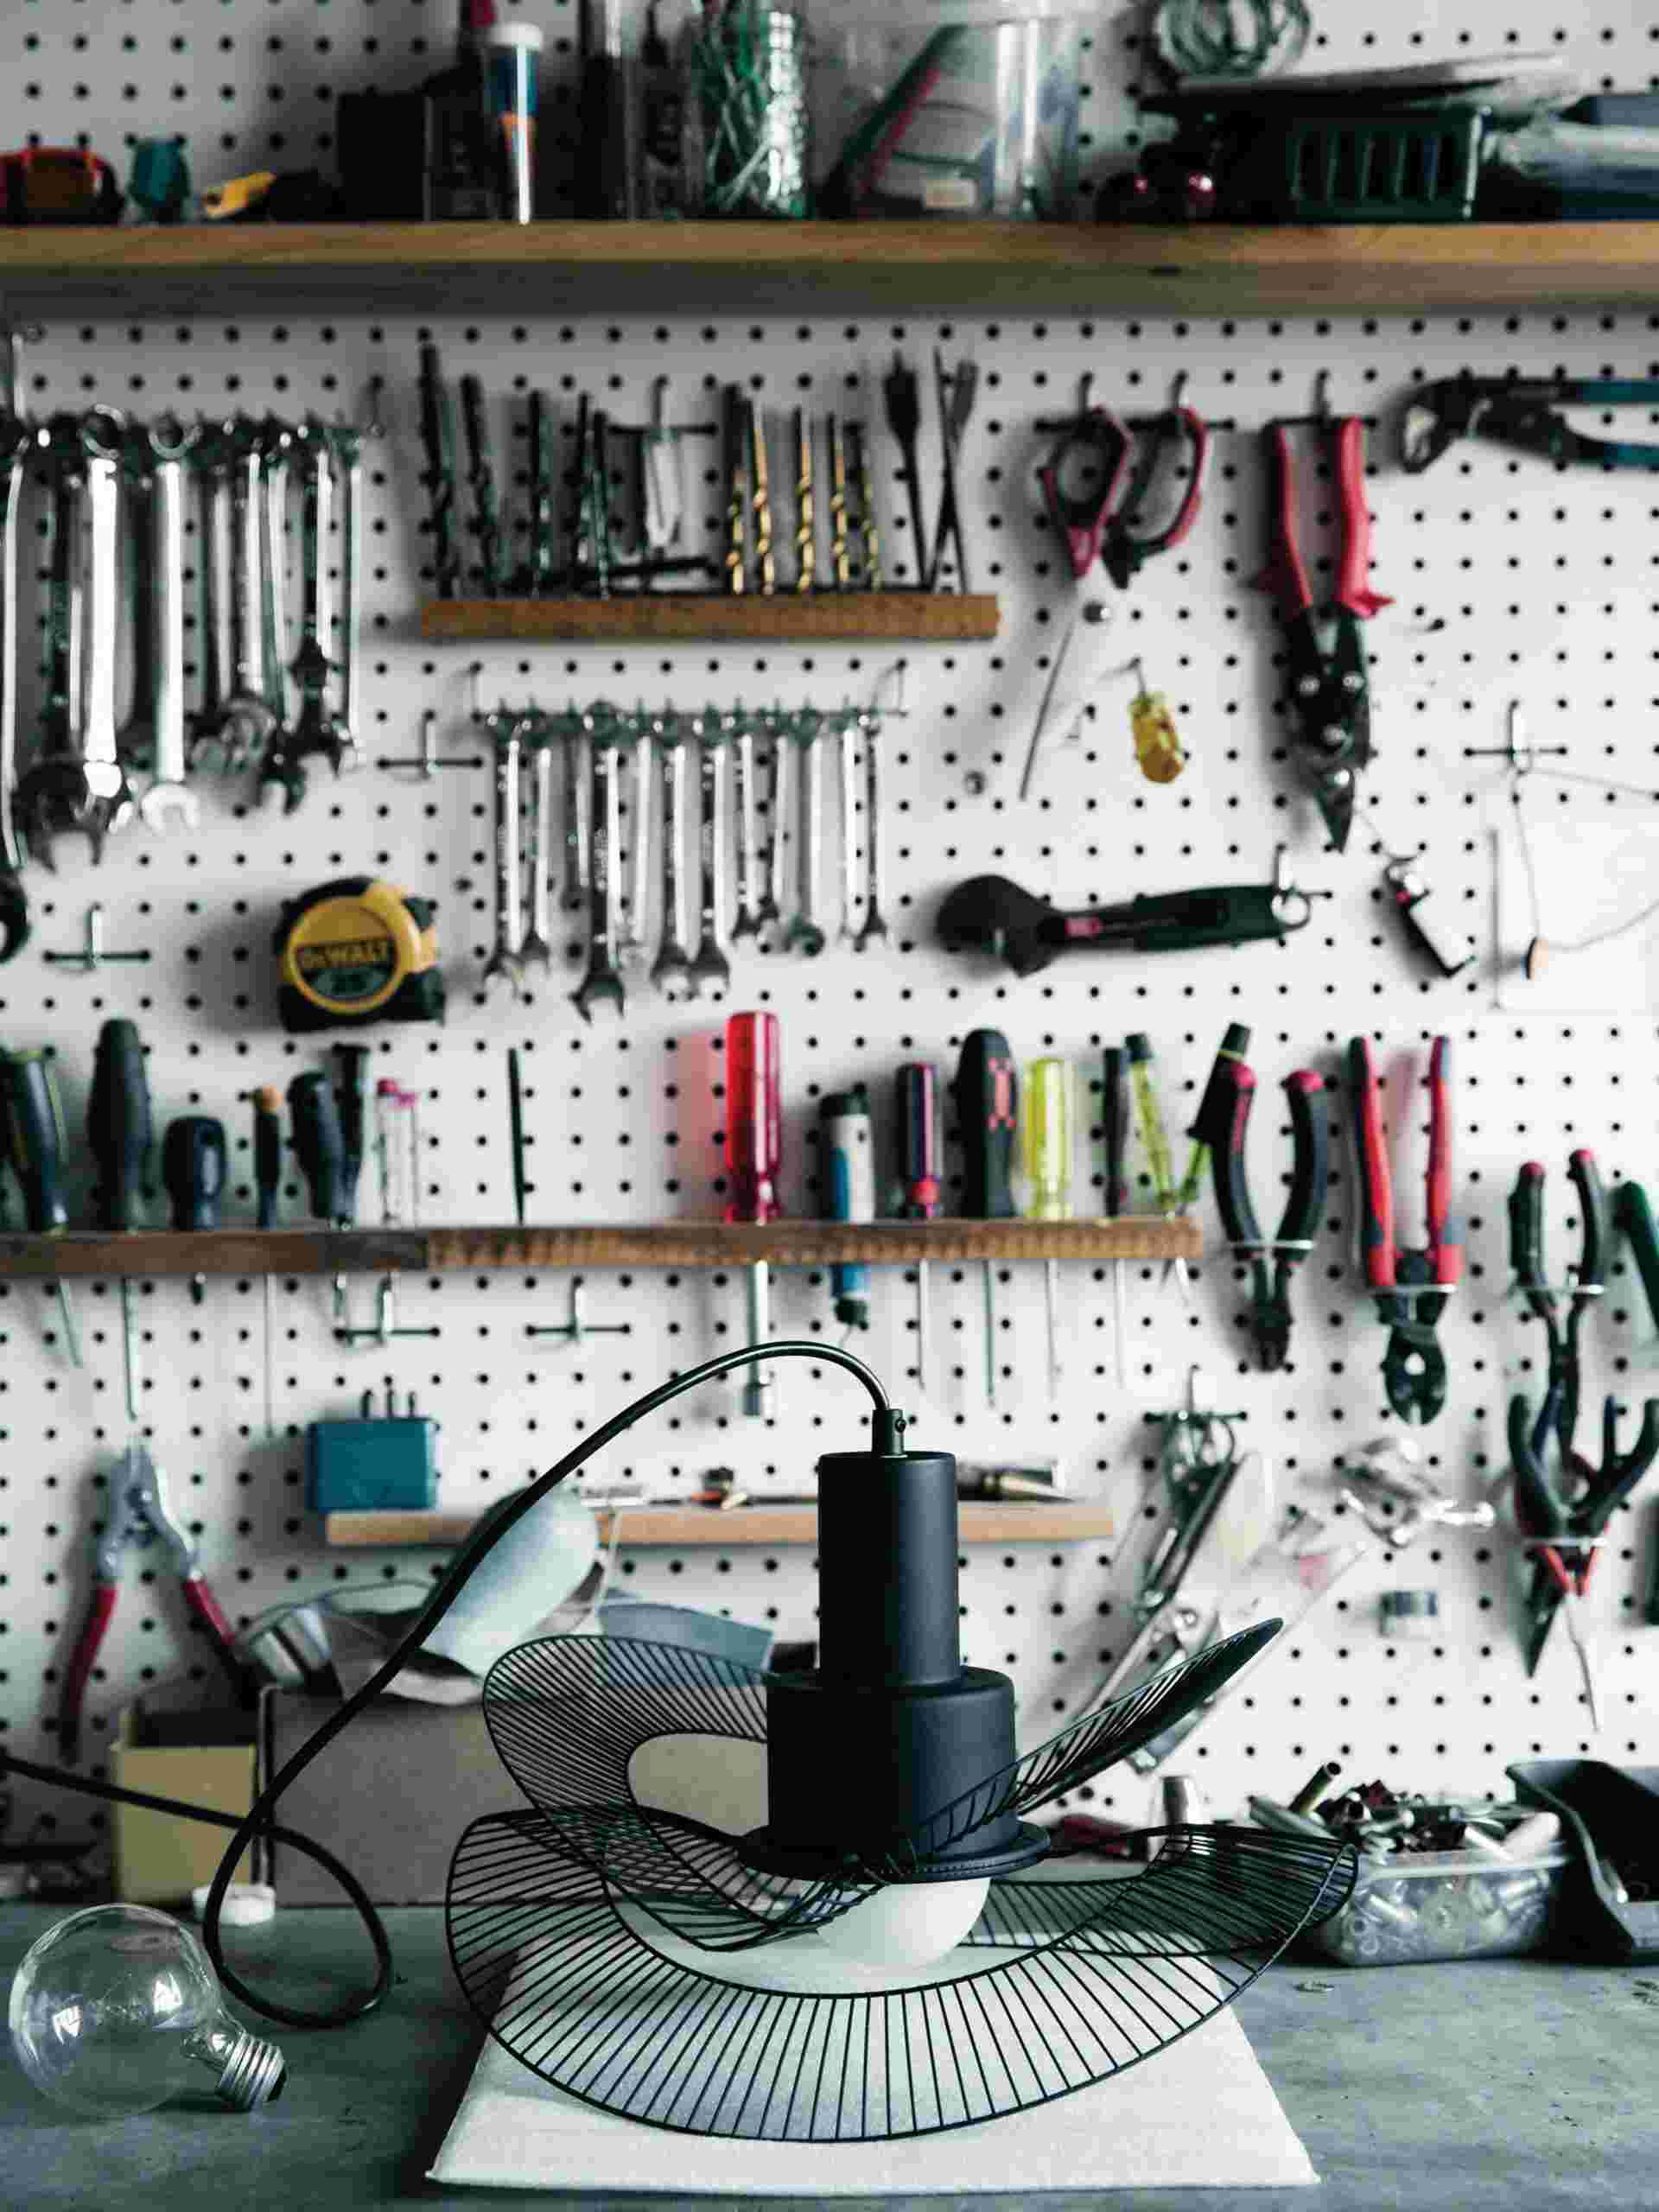 tools hanging on a pegboard